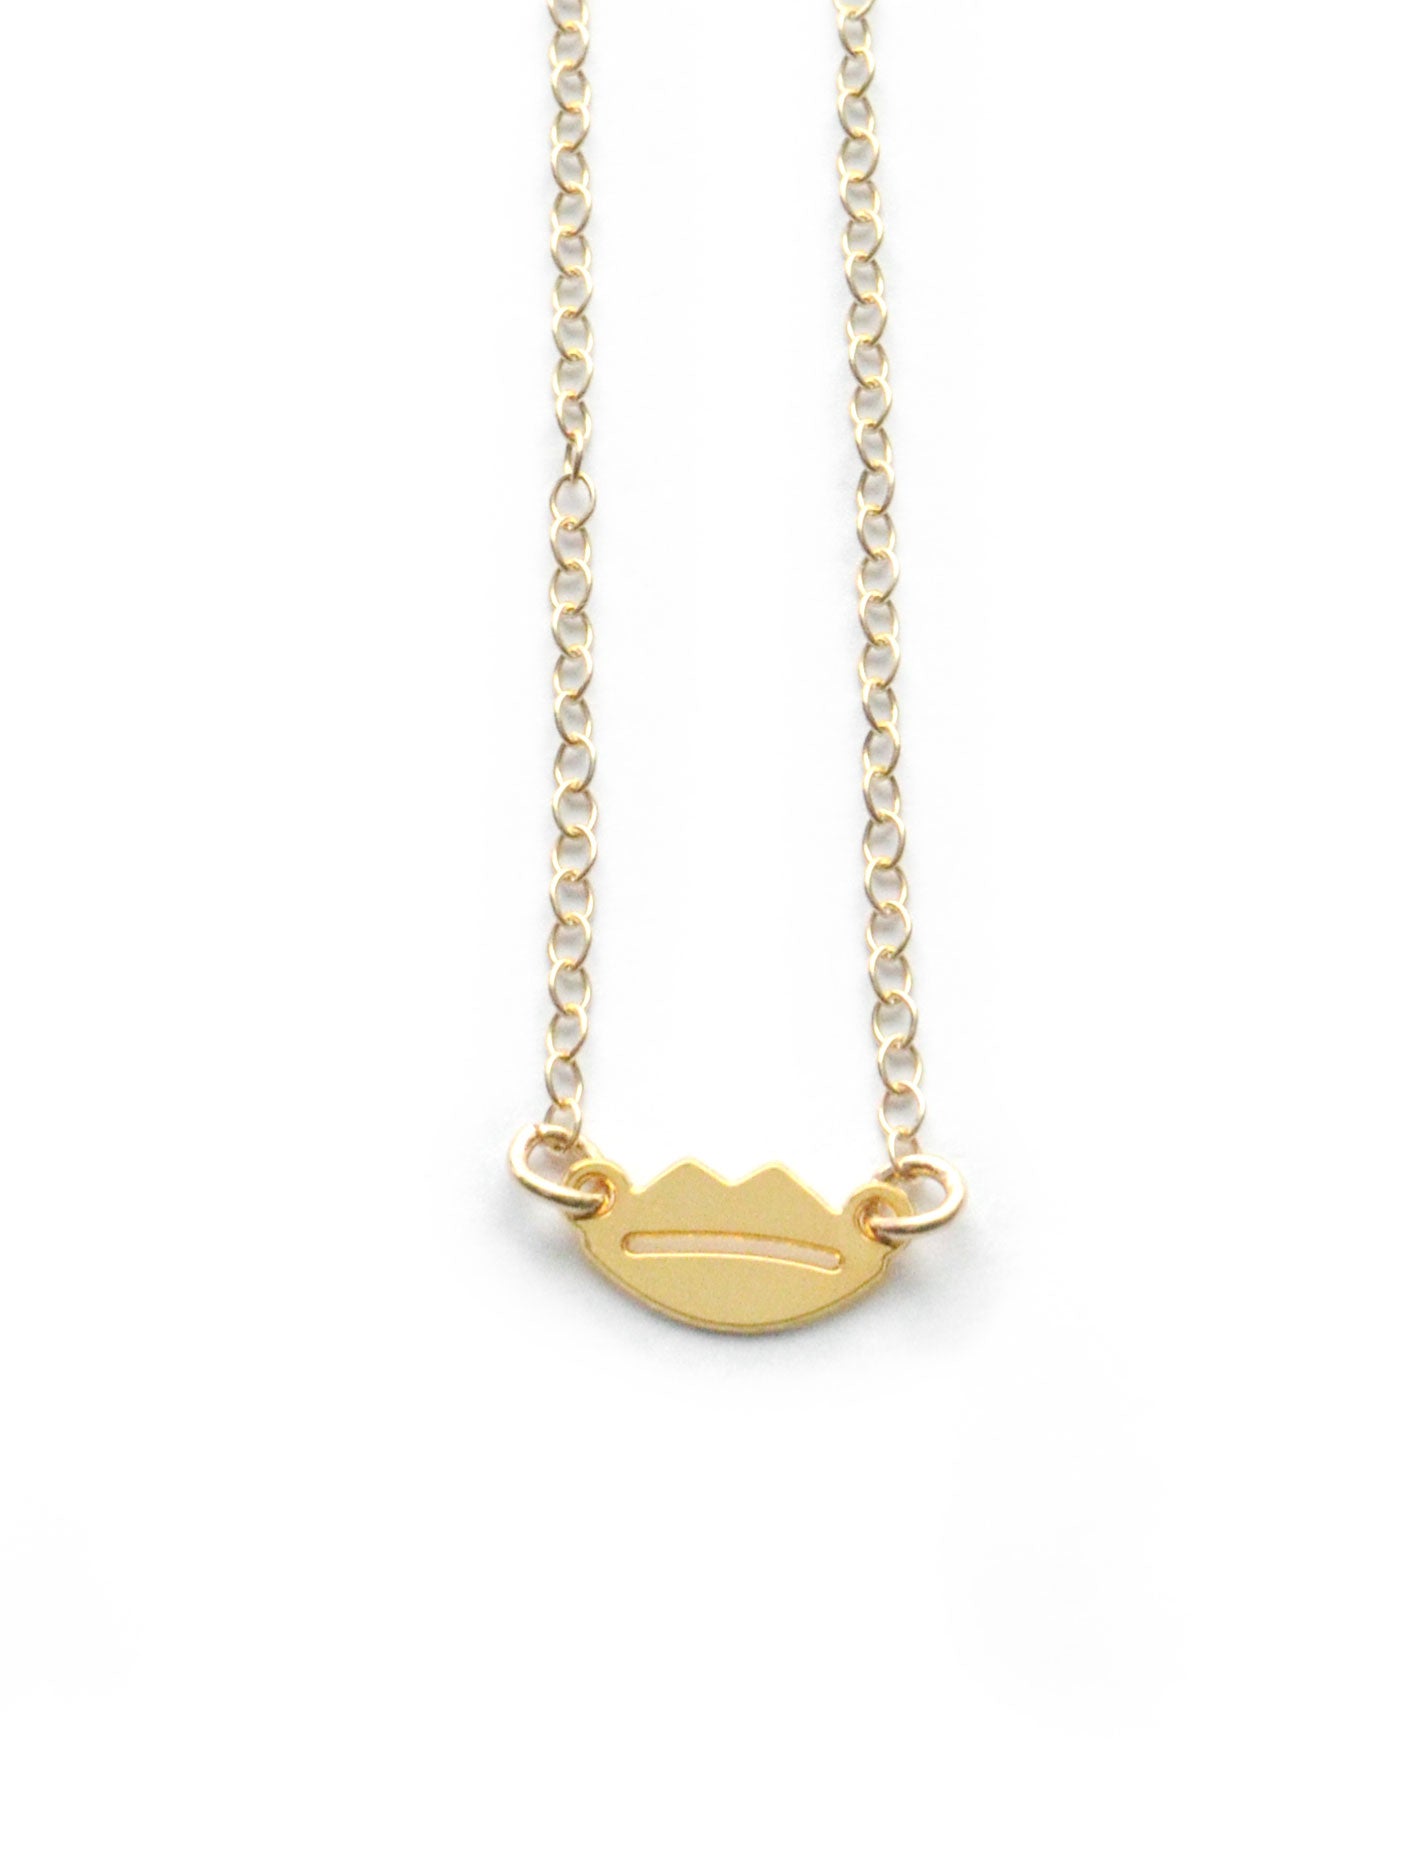 Mini Lips Necklace - High Quality, Affordable Necklace - Available in Gold and Silver - Made in USA - Brevity Jewelry